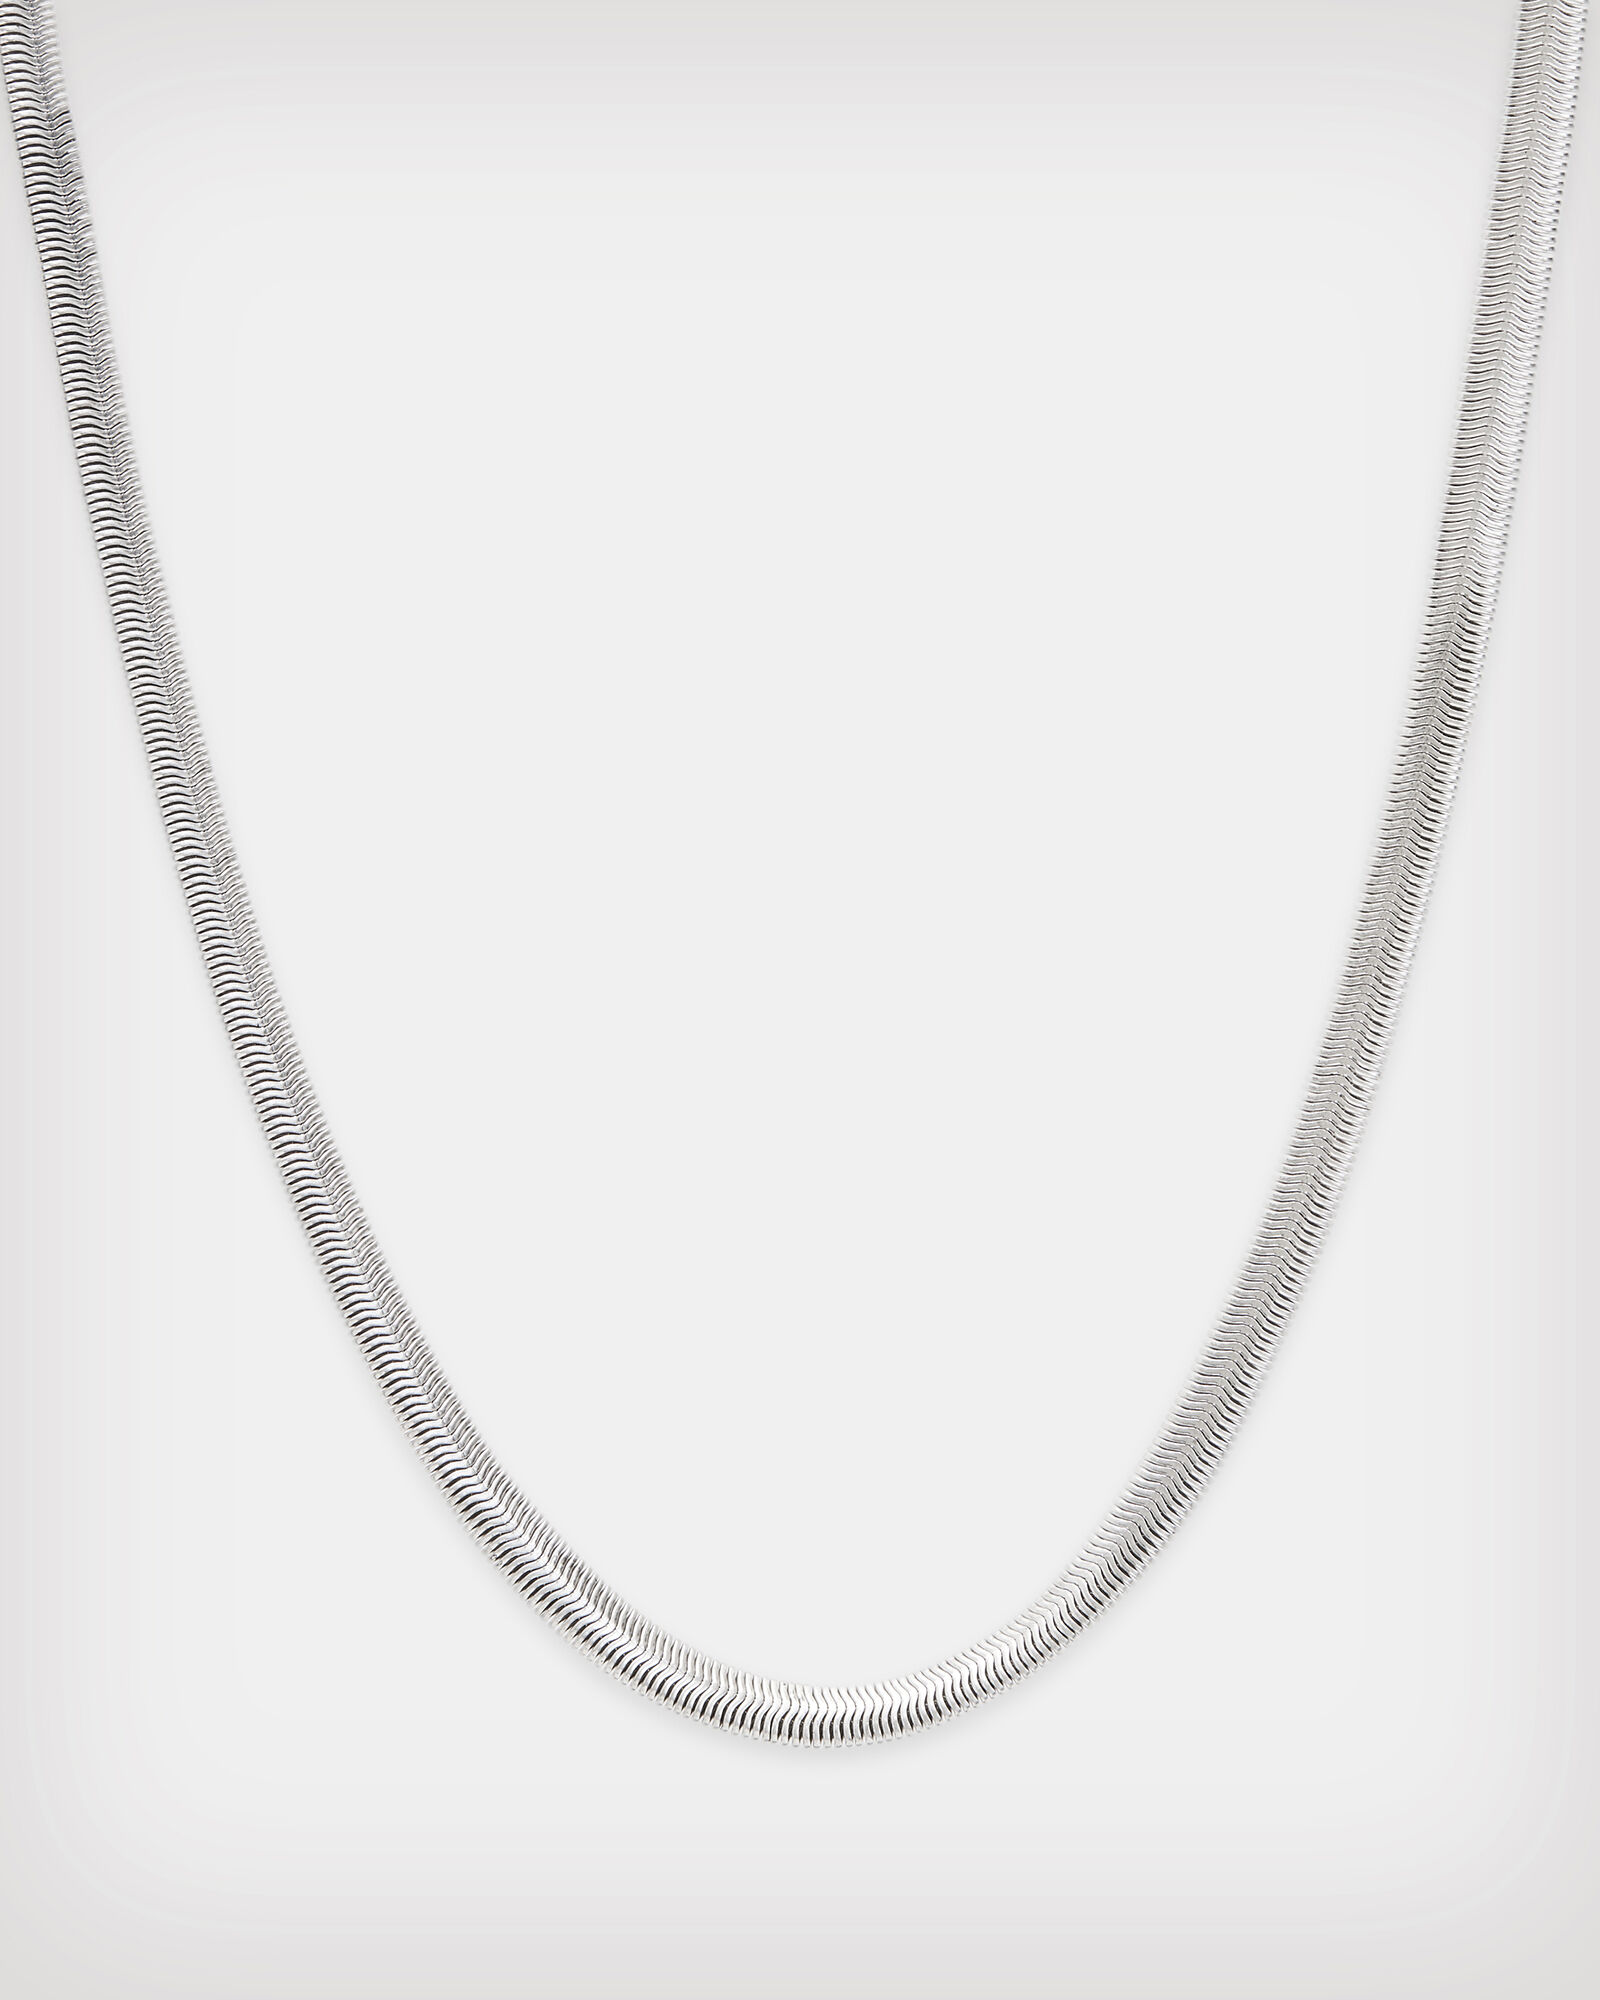 OLIVIA SILVER SNAKE CHAIN NECKLACE | Silver chain necklace, Chain necklace,  Modern silver necklace